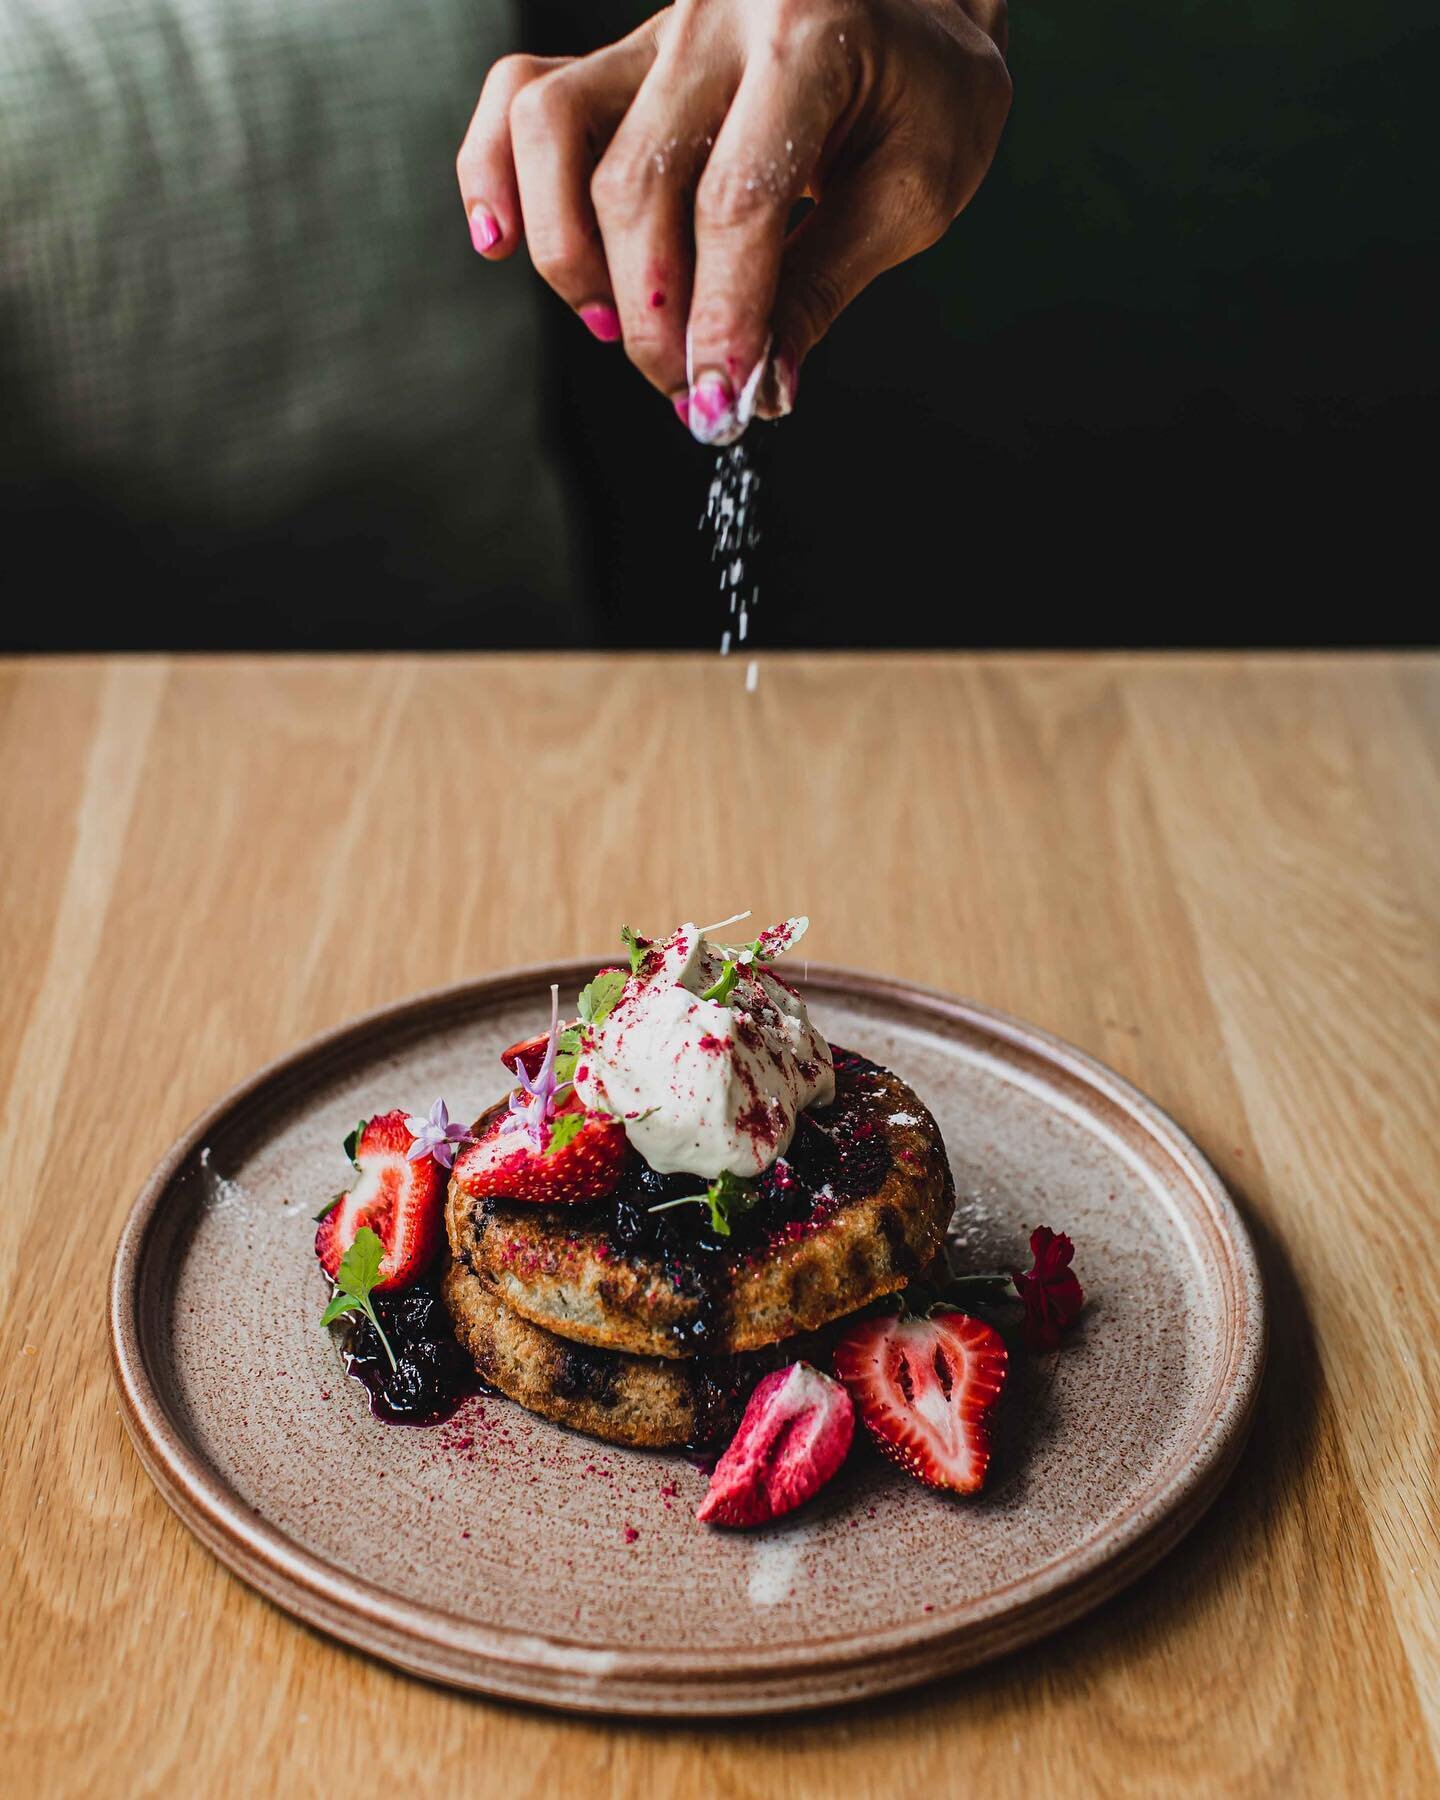 A little sprinkle of yum yum 👌🏼🤙🏼
These pancakes are AMAZINGGGGG 🤩 
Blueberry pancakes, berries, organic maple, vanilla cream cheese 🥞🍓🫐
#mawestend #brisbane